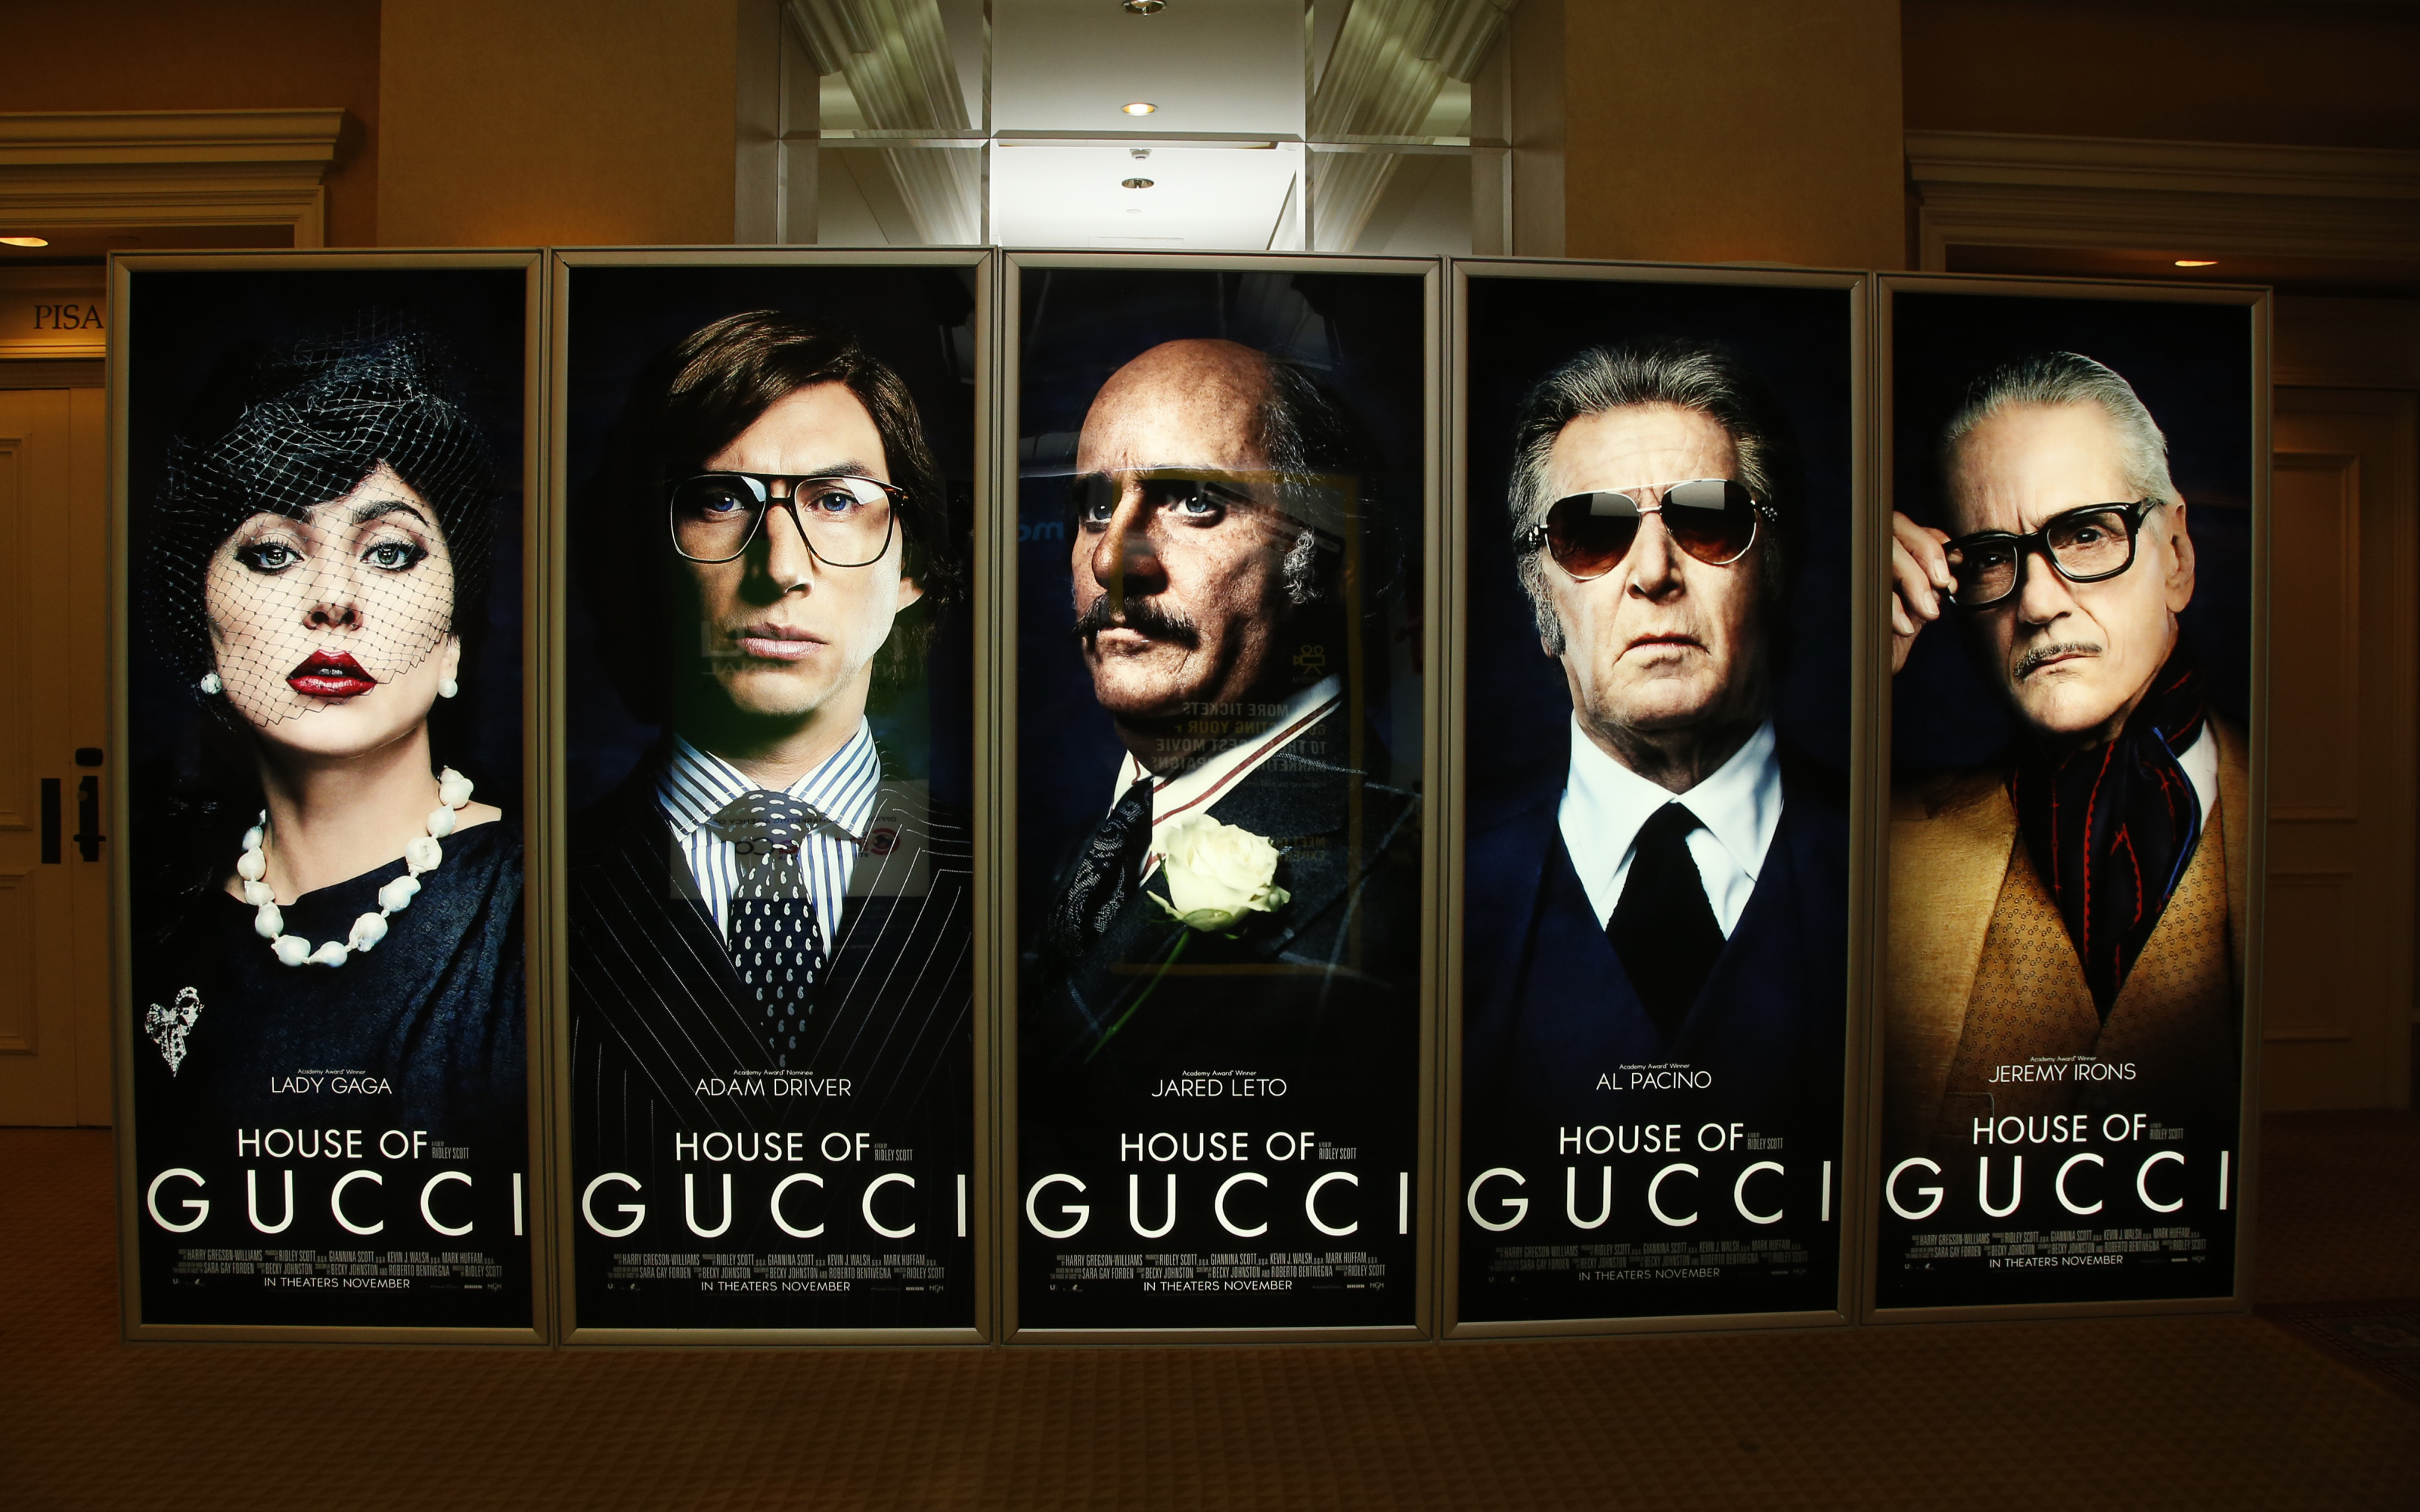 Where to watch House of Gucci (2021) online Streaming for free at home